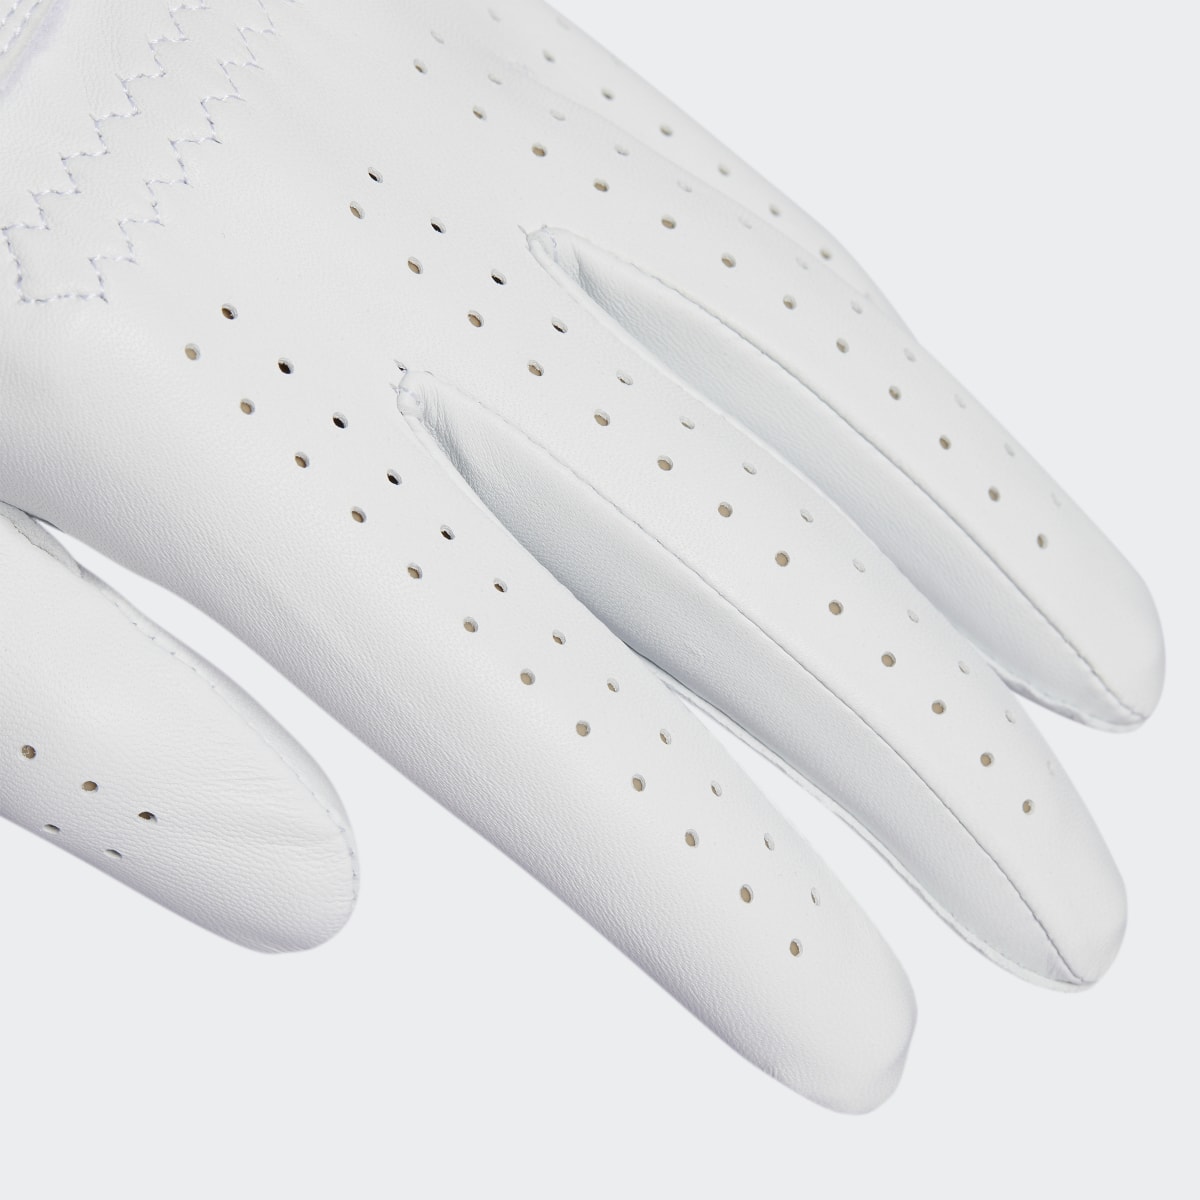 Adidas Ultimate Leather Golf Glove. 5